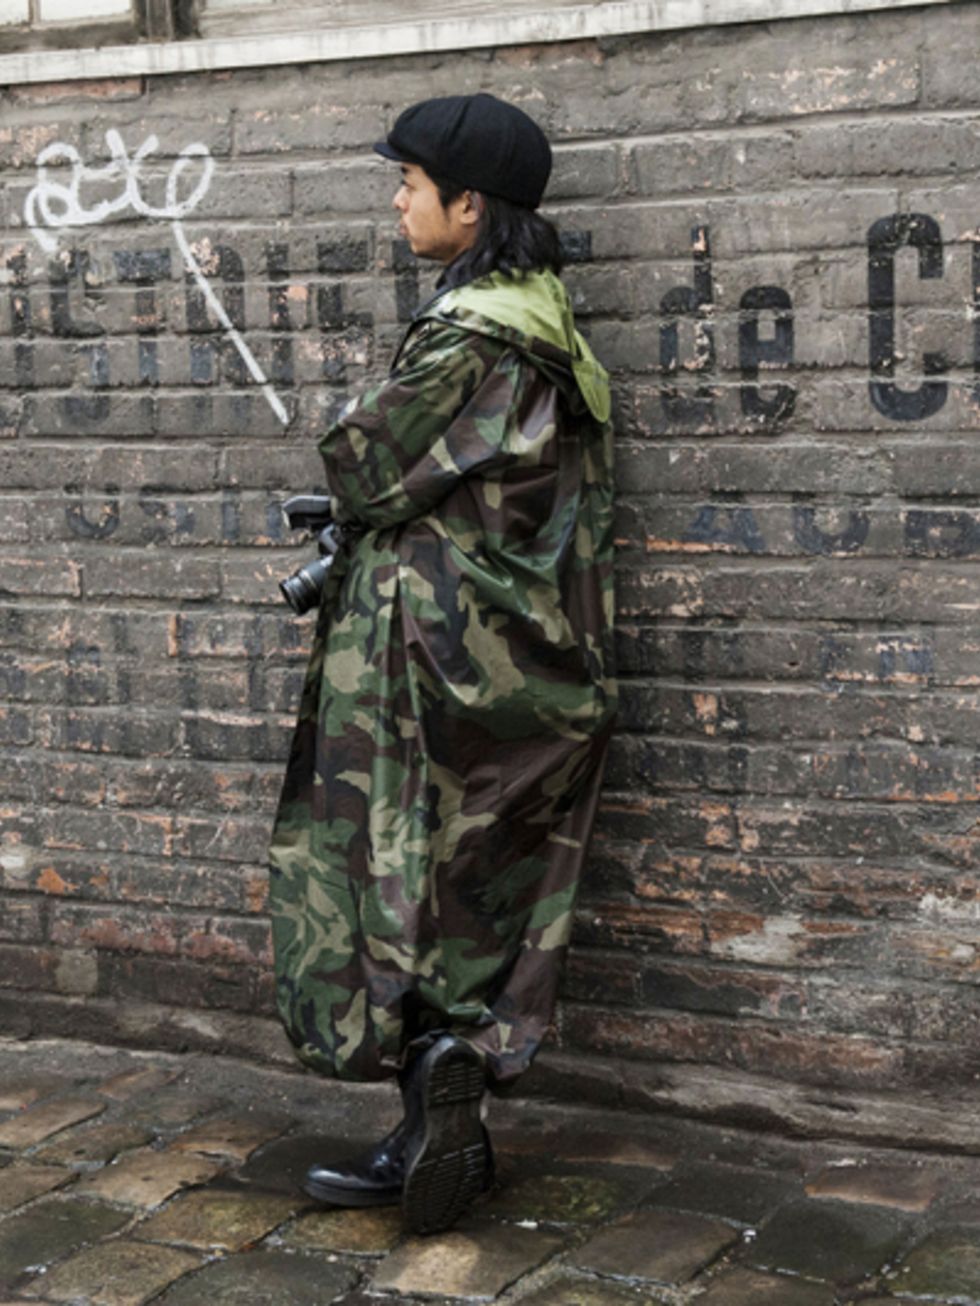 Soldier, Cap, Camouflage, Military camouflage, Military uniform, Military person, Brick, Beret, Street fashion, Headgear, 